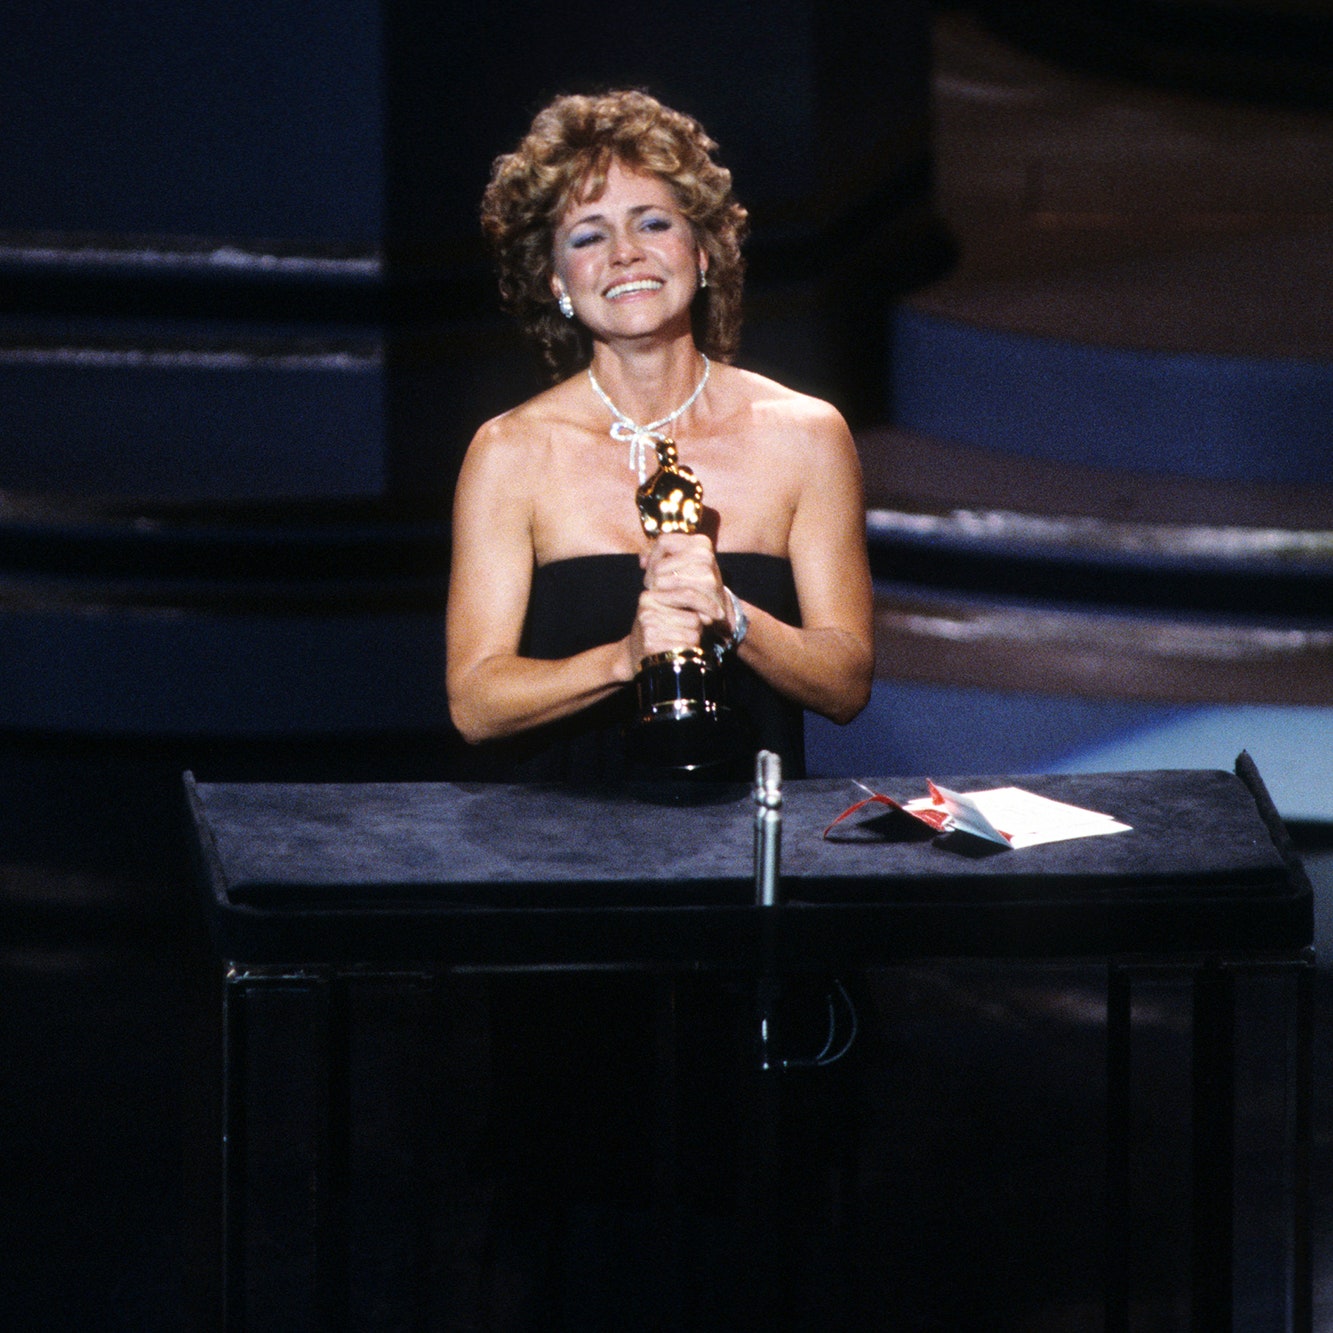 Can You Identify These Iconic Oscars Acceptance Speeches?